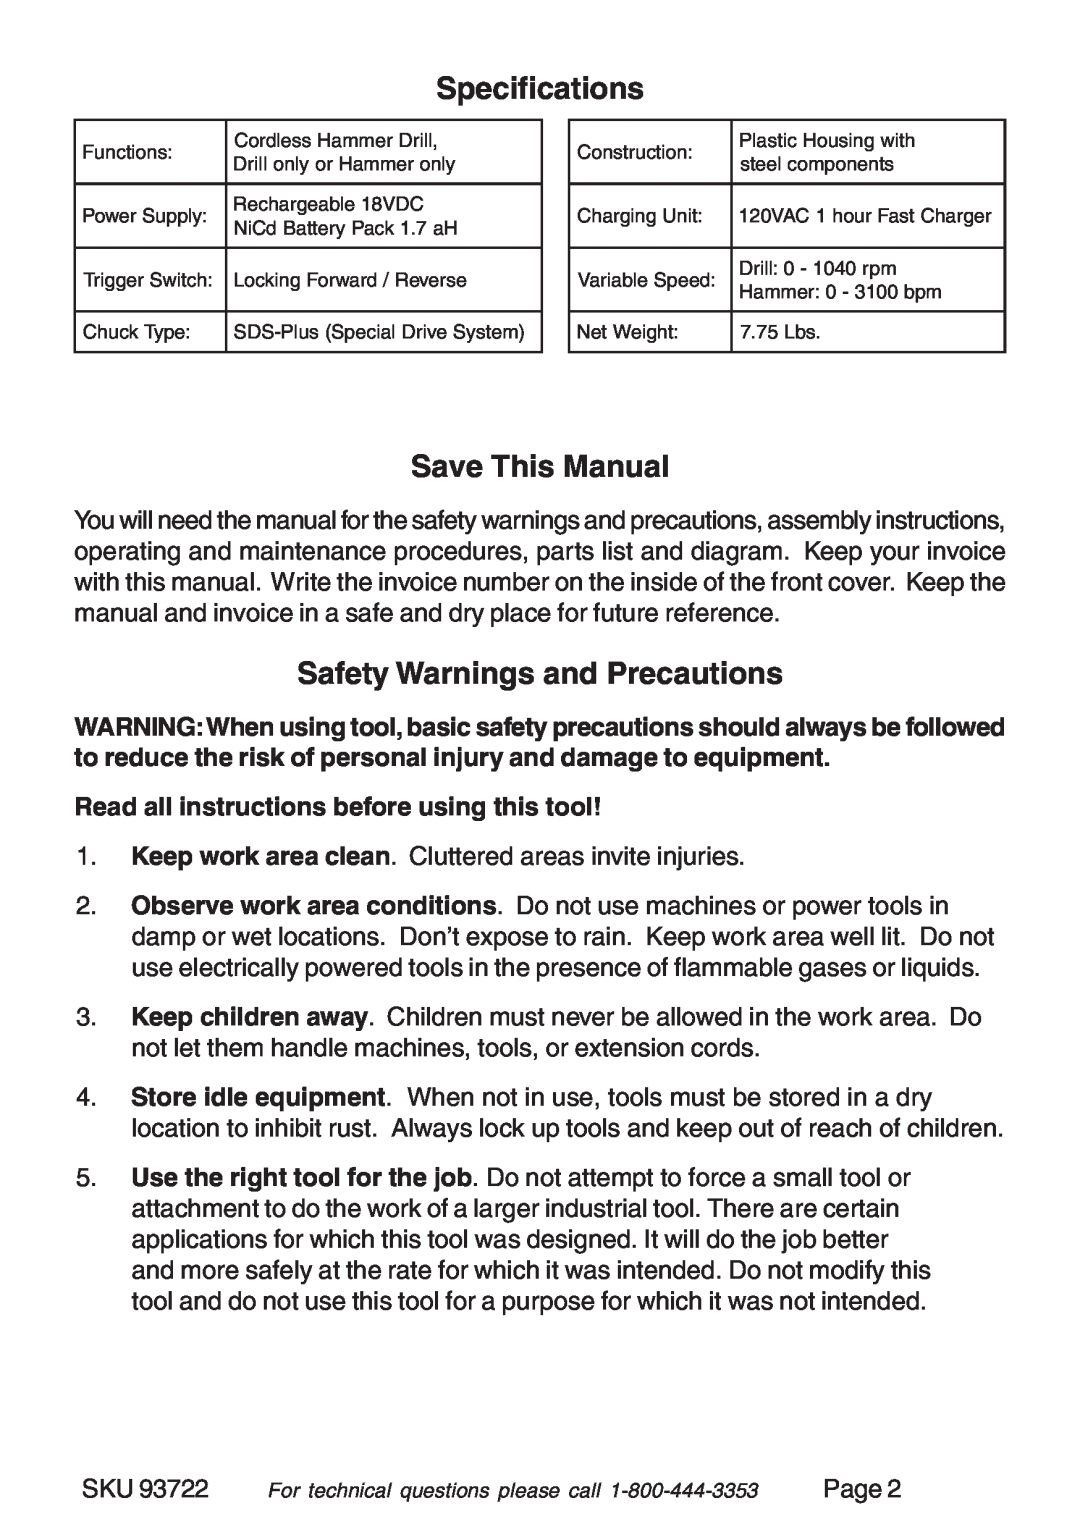 Harbor Freight Tools 93722 operating instructions Specifications, Save This Manual, Safety Warnings and Precautions, Page 